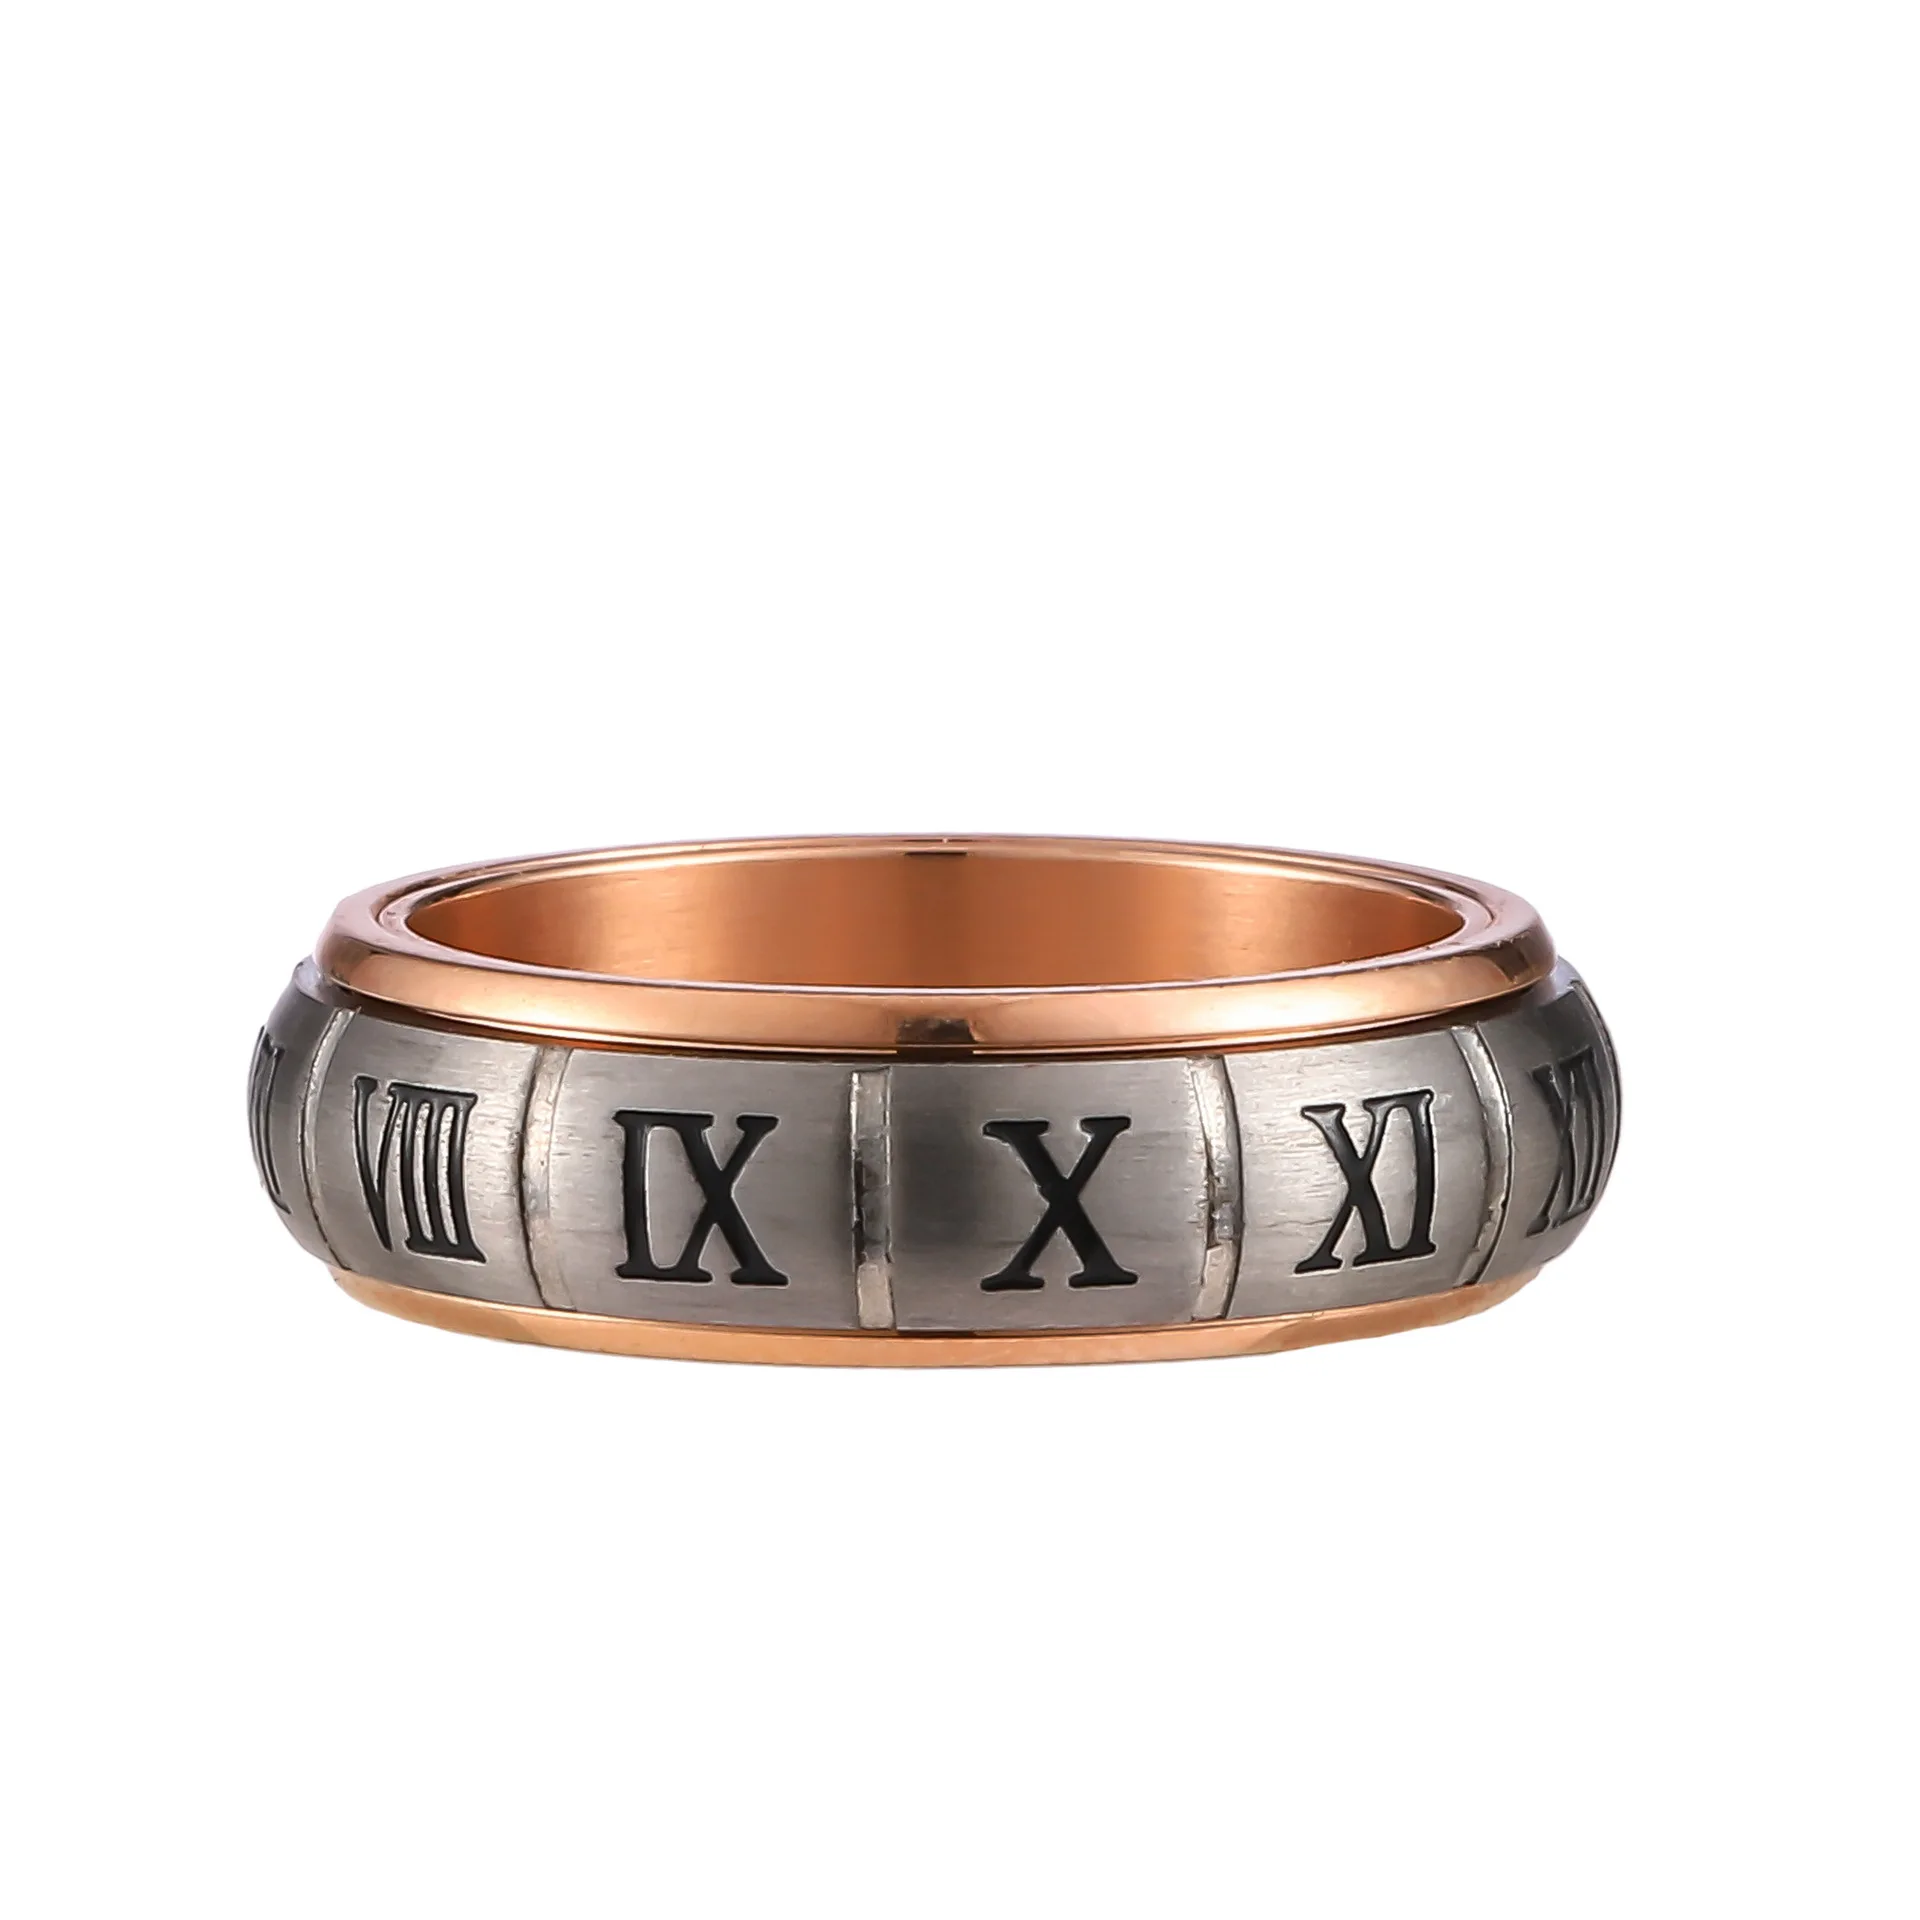 

Classic Fashion Creative Rose Gold Plated Personality Men Women Stainless Steel Roman Numeral Rings, Picture shows